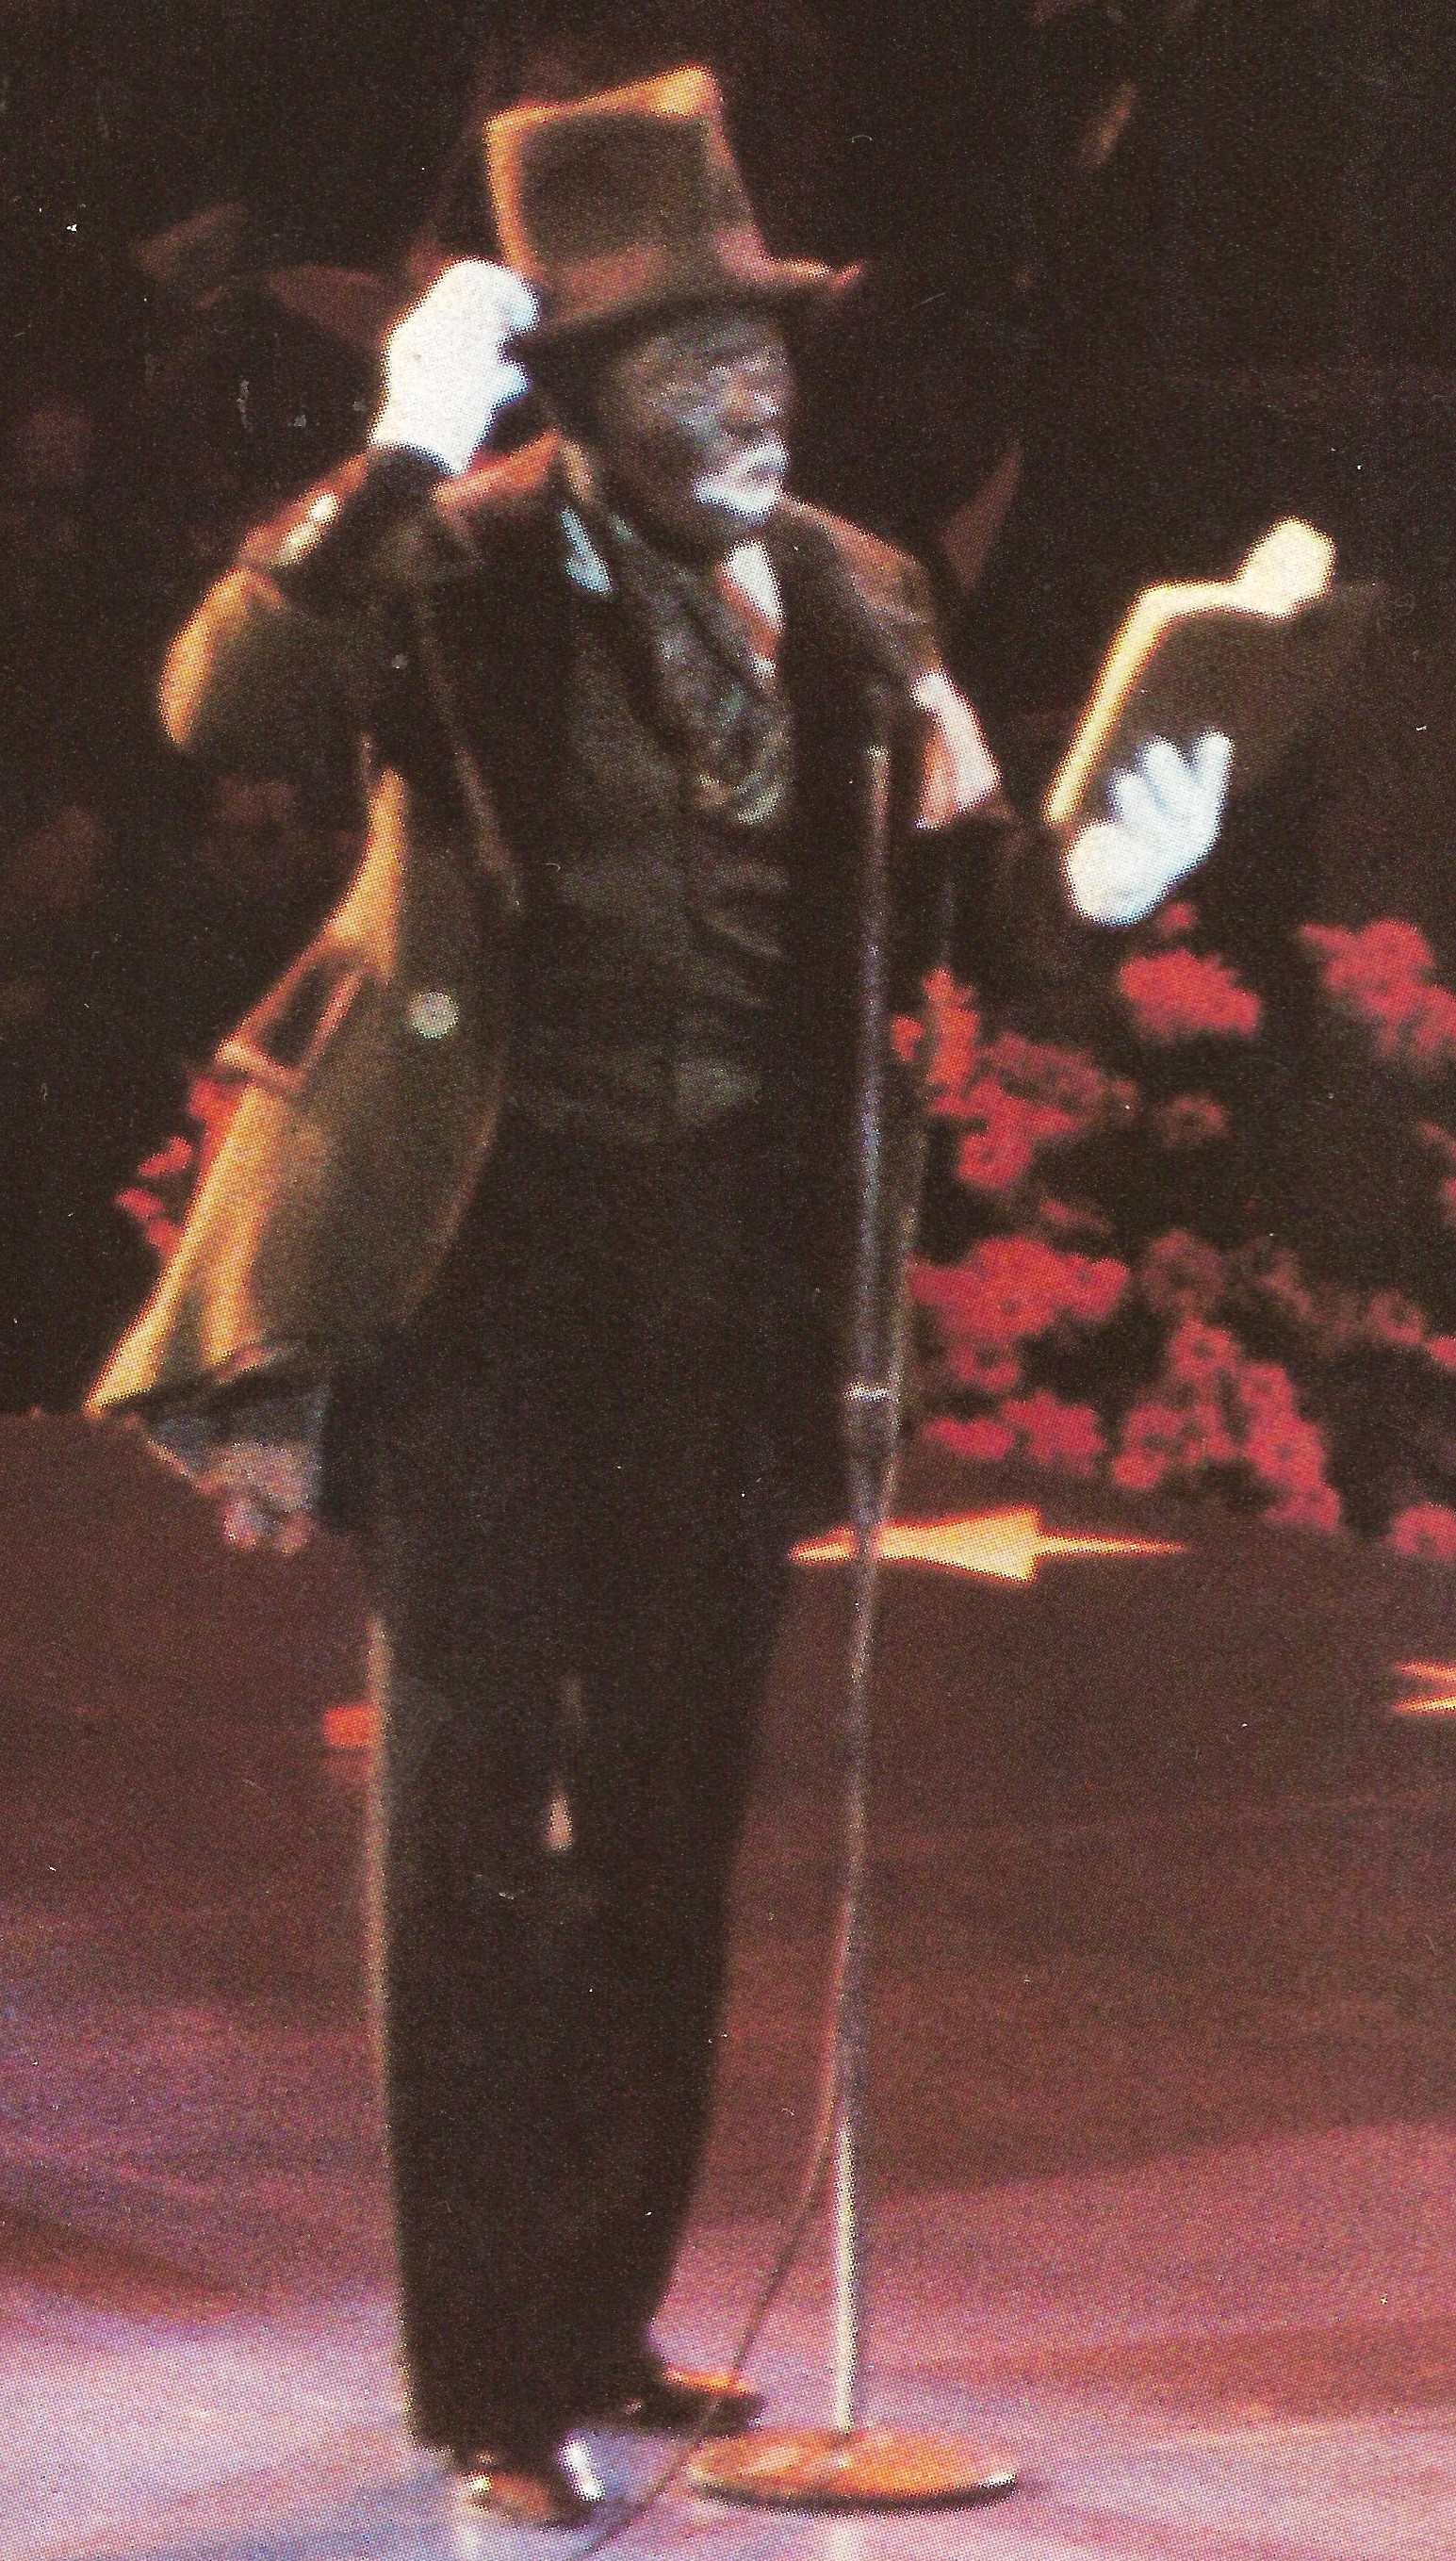 Although African-American entertainer Ben Vereen sought to shed light on the stereotyping resulting from old minstrel shows his decision caused controversy at the '81 gala.